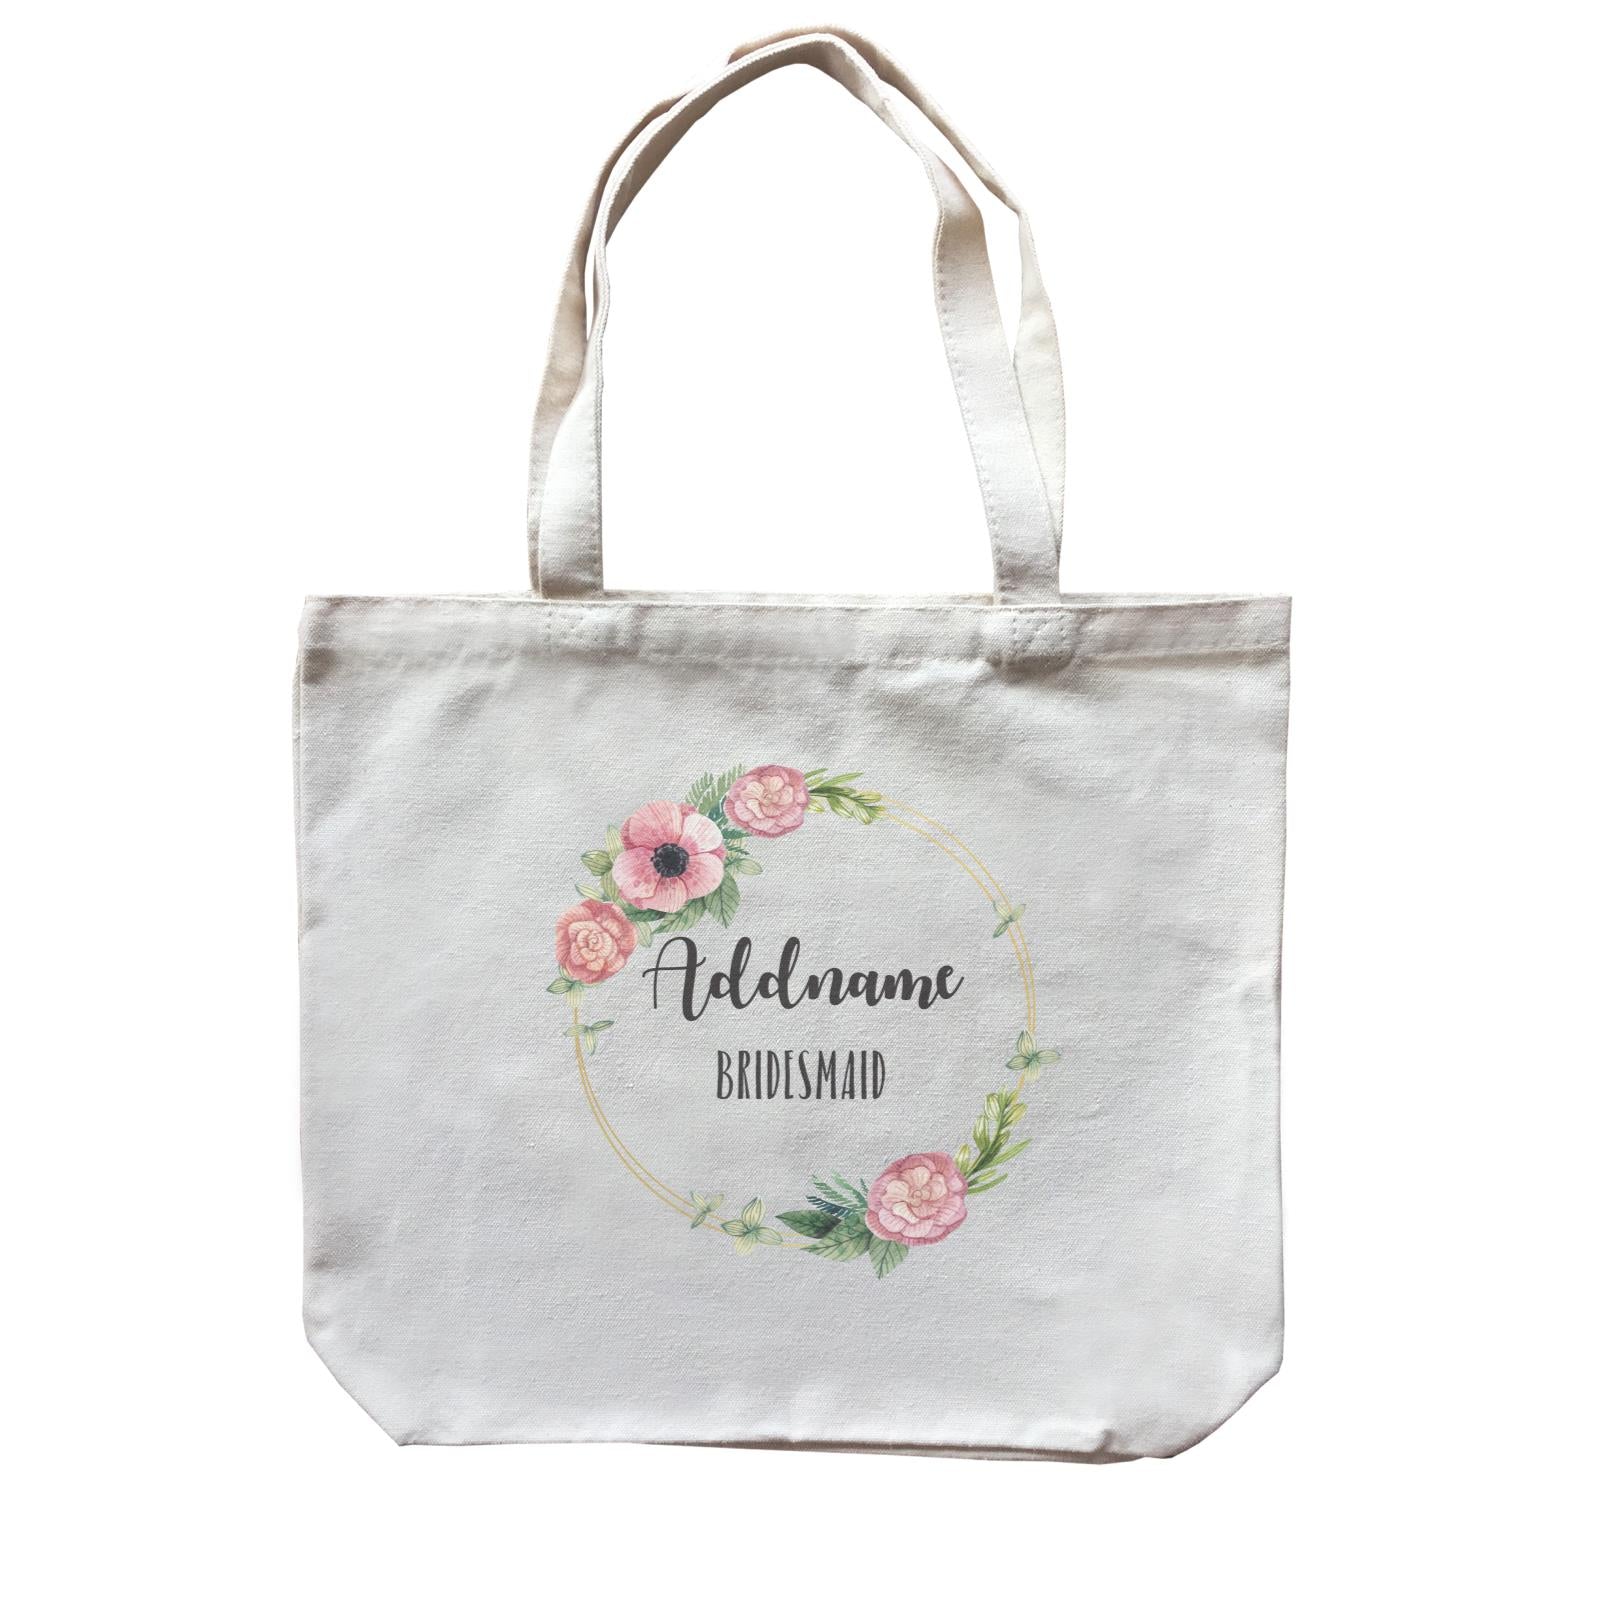 Bridesmaid Floral Sweet Pink Flower Wreath With Circle Bridesmaid Addname Canvas Bag